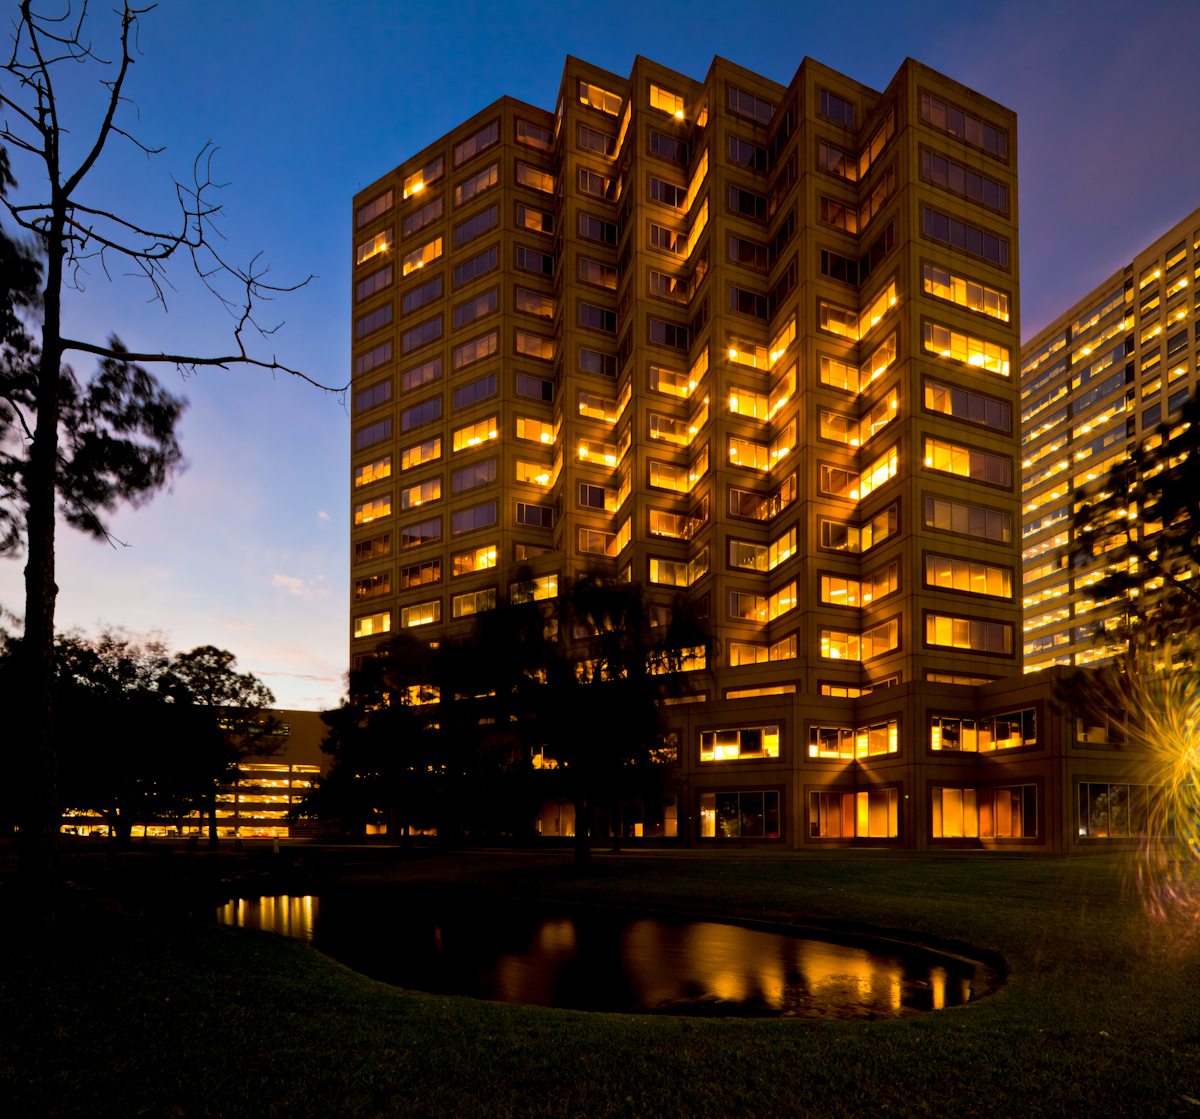 Two Westlake Park is a 455,000 square foot high-rise Class​ A trophy office tower located in the heart of the Energy​ Corridor submarket​ of West Houston, within Westlake Park, which boasts 2.8 million square feet of Class A offices situated on 58 acres, and is considered to be West Houston’s premier suburban office development.